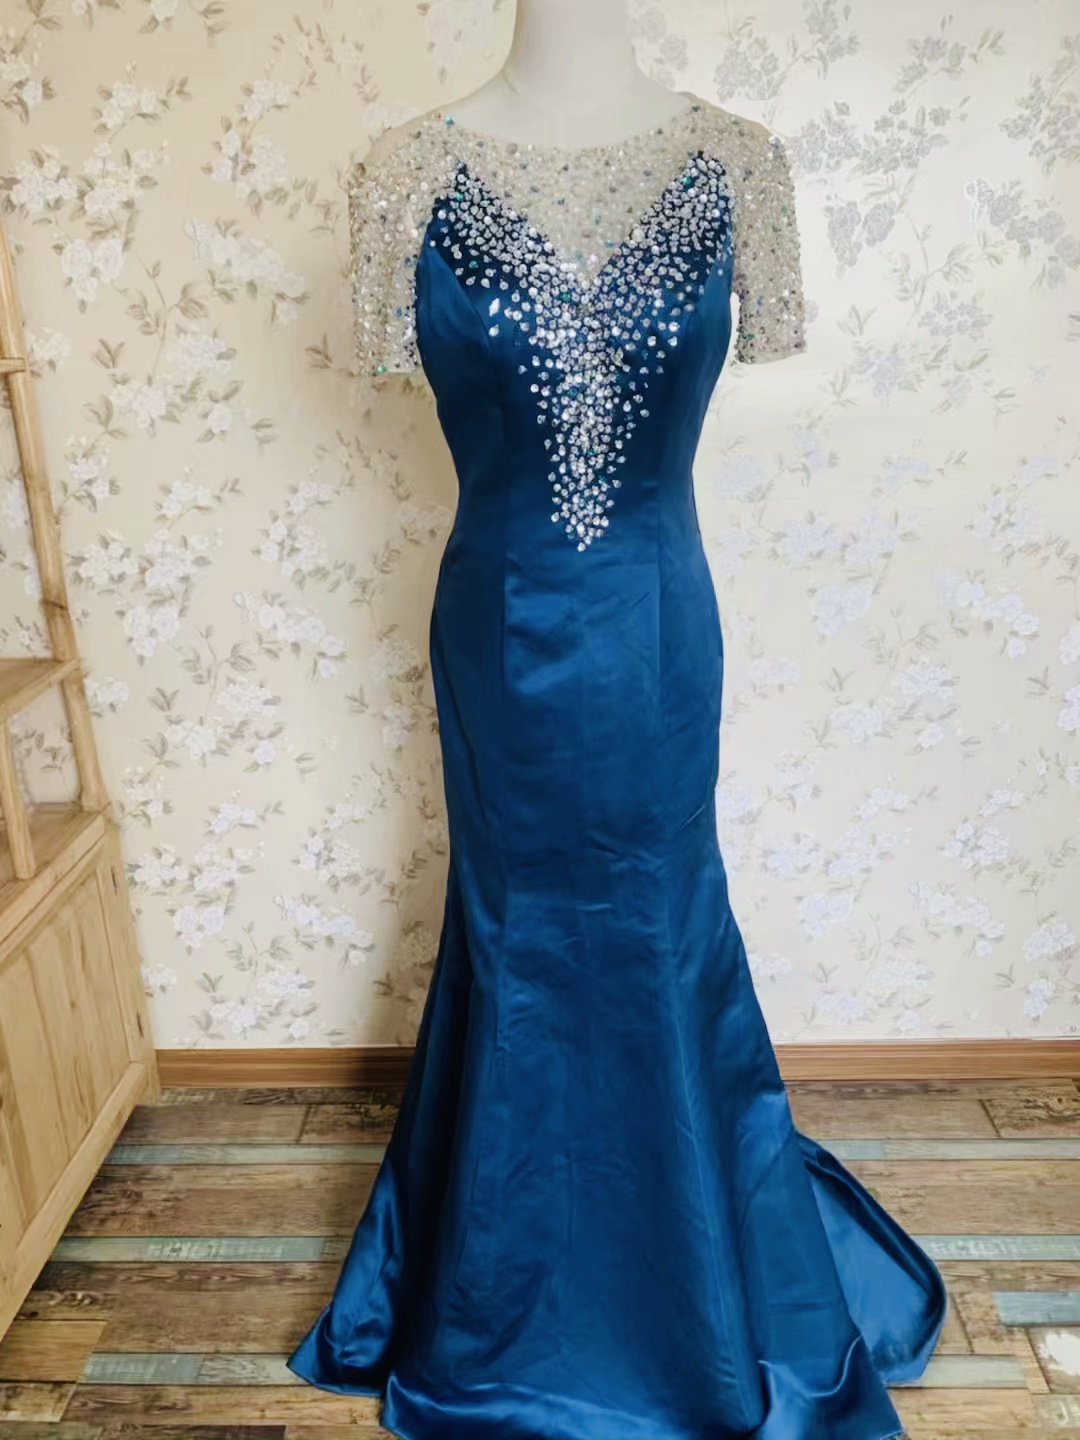 Short sleeve prom dress,royal blue party dress, formal wedding guest dress,Queenie Prom Unique,Custom Made